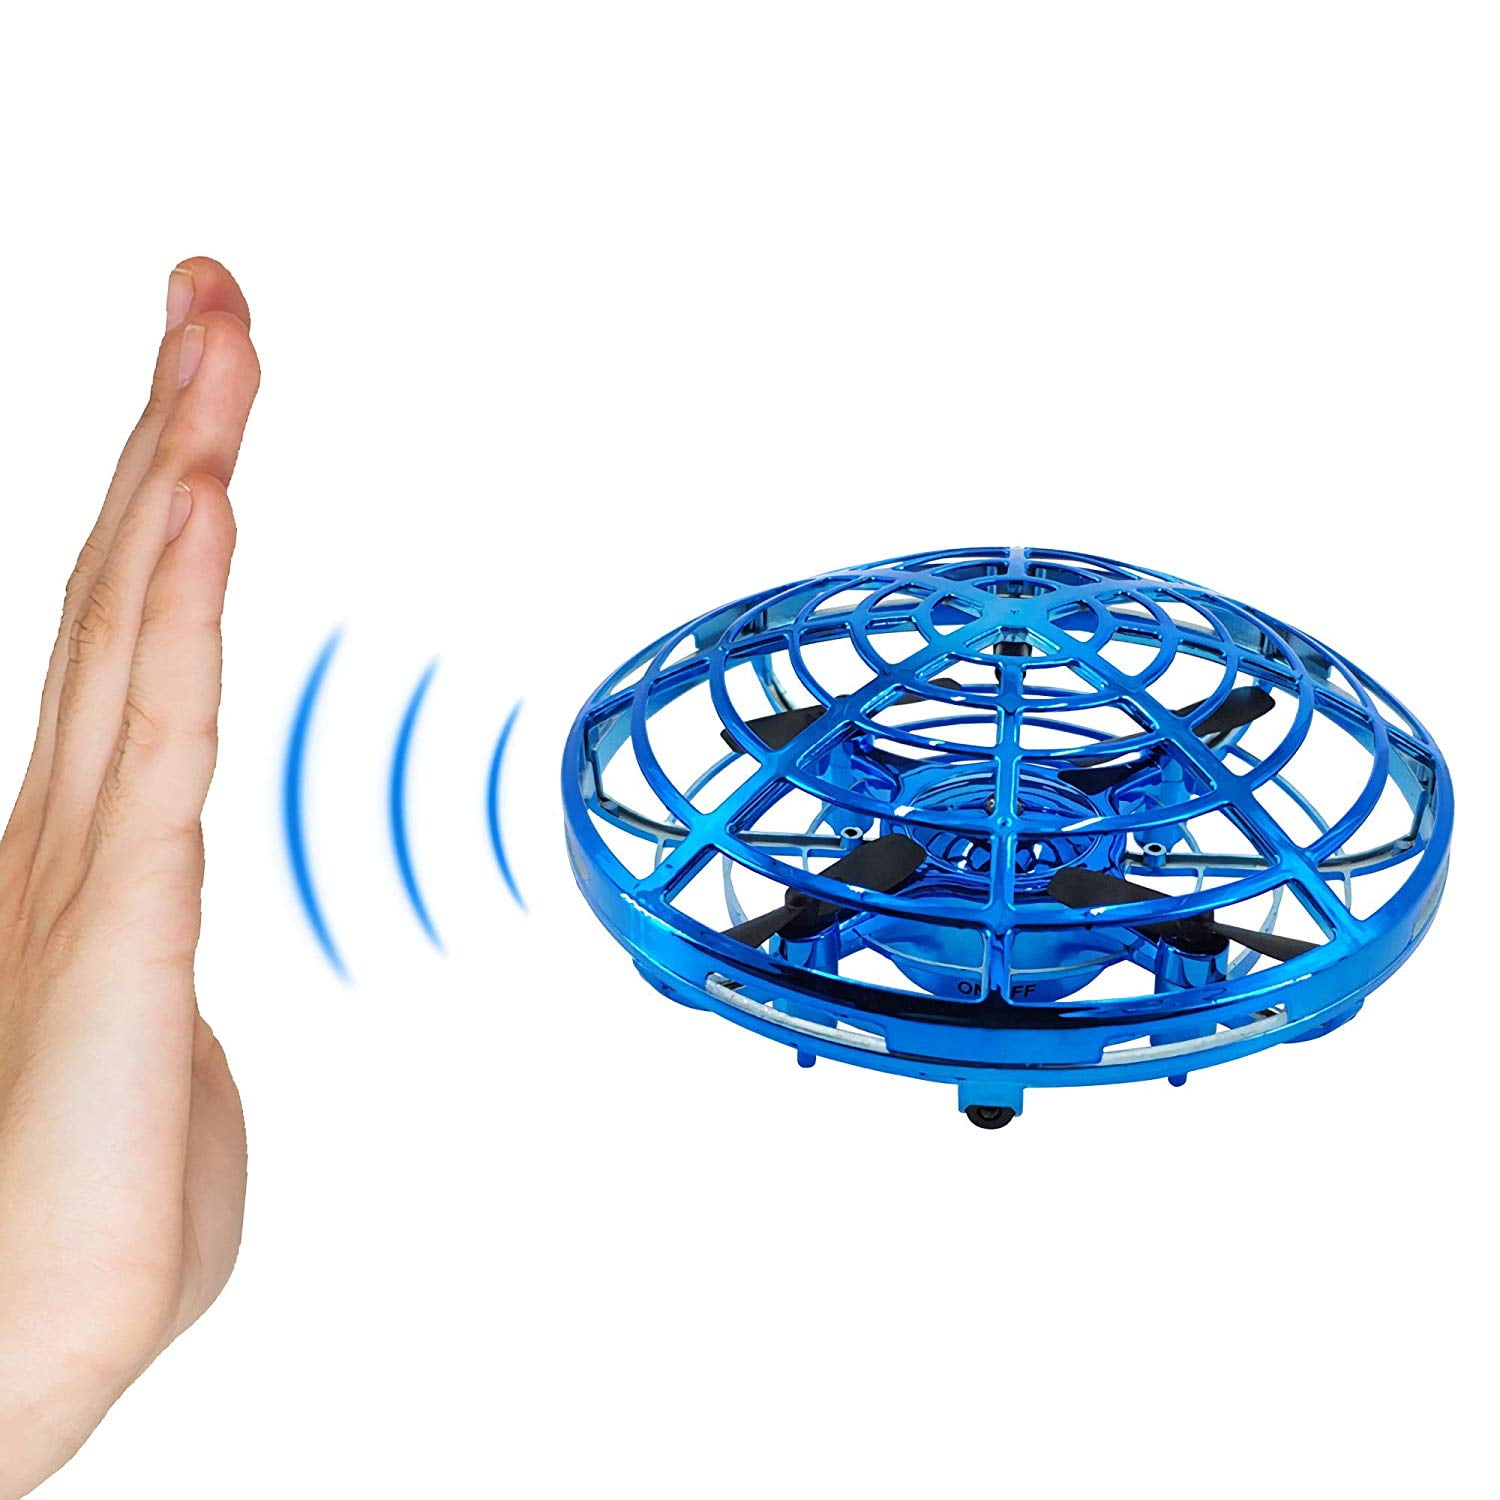 Details about   360° UFO Mini Electric Remote RC Drone Quadcopter 3D Flip Helicopter Toys 